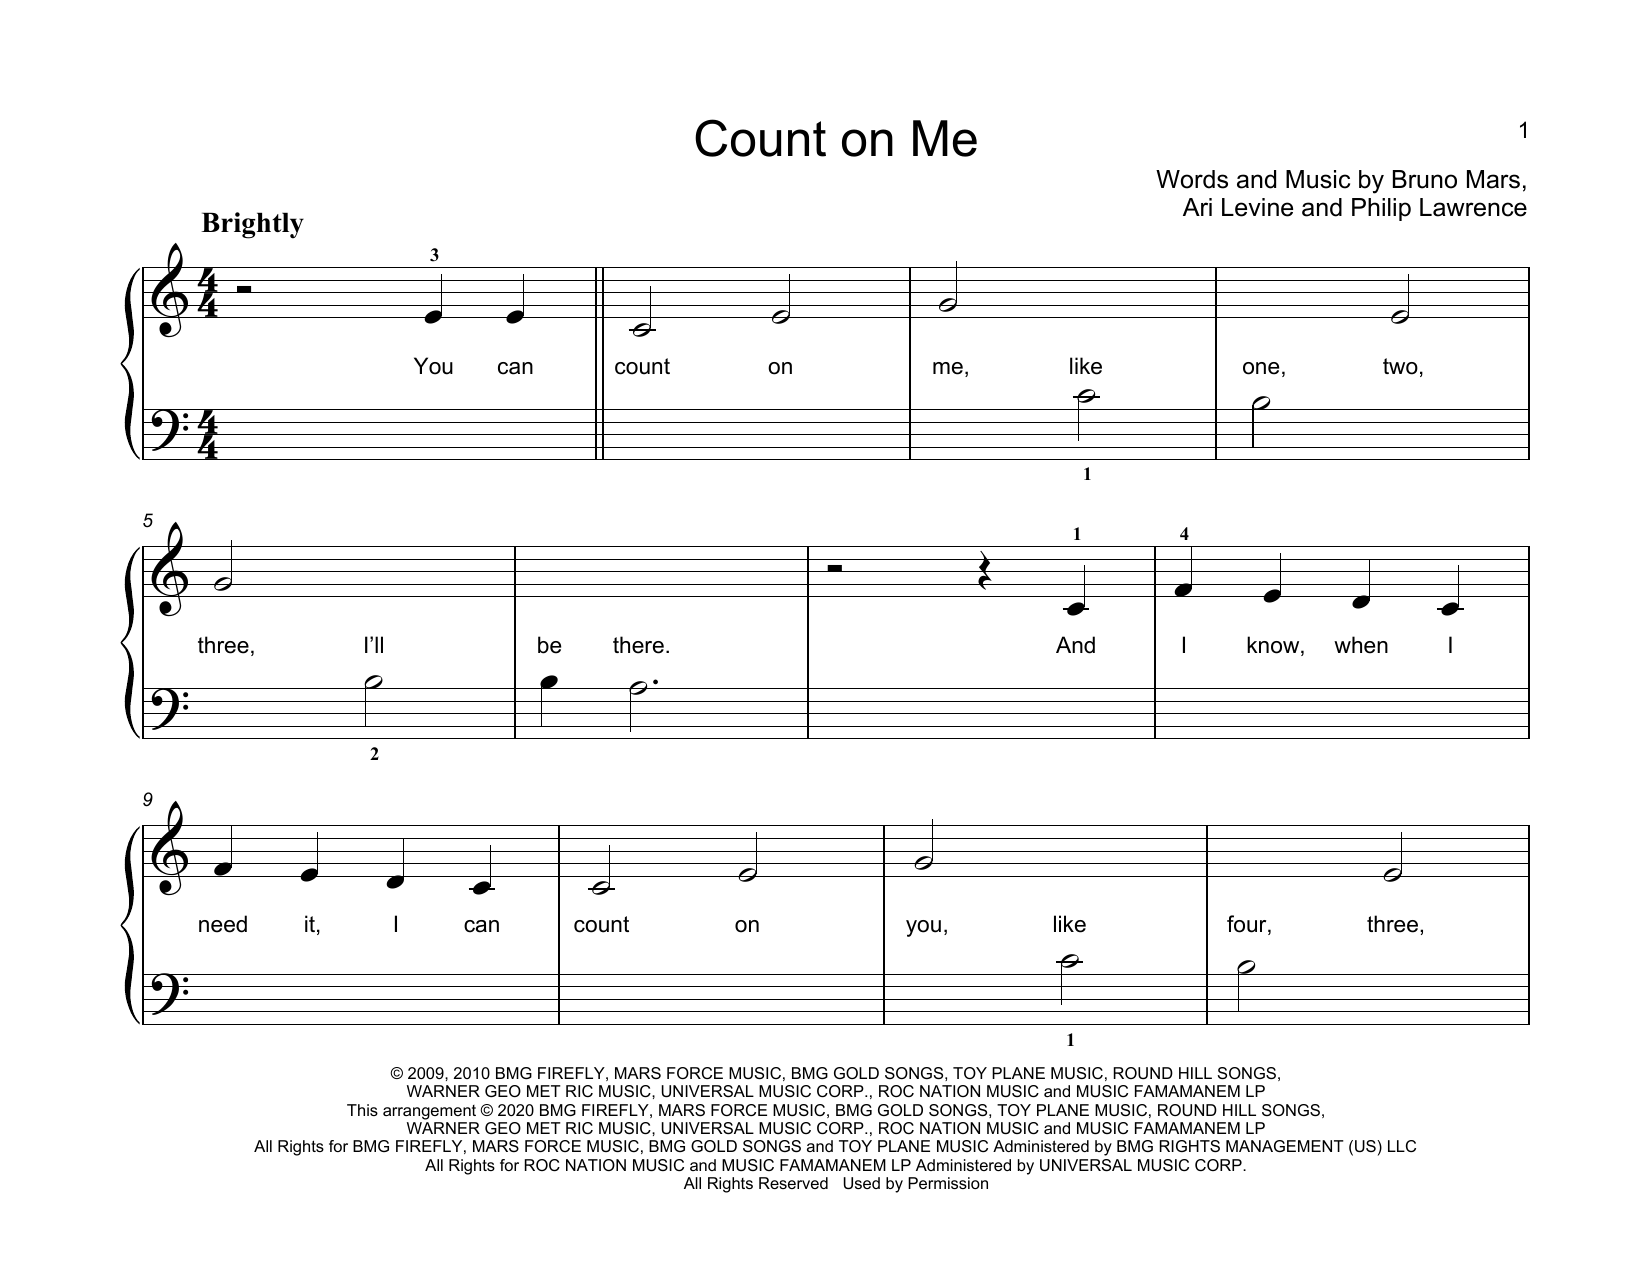 bruno mars count on me song download